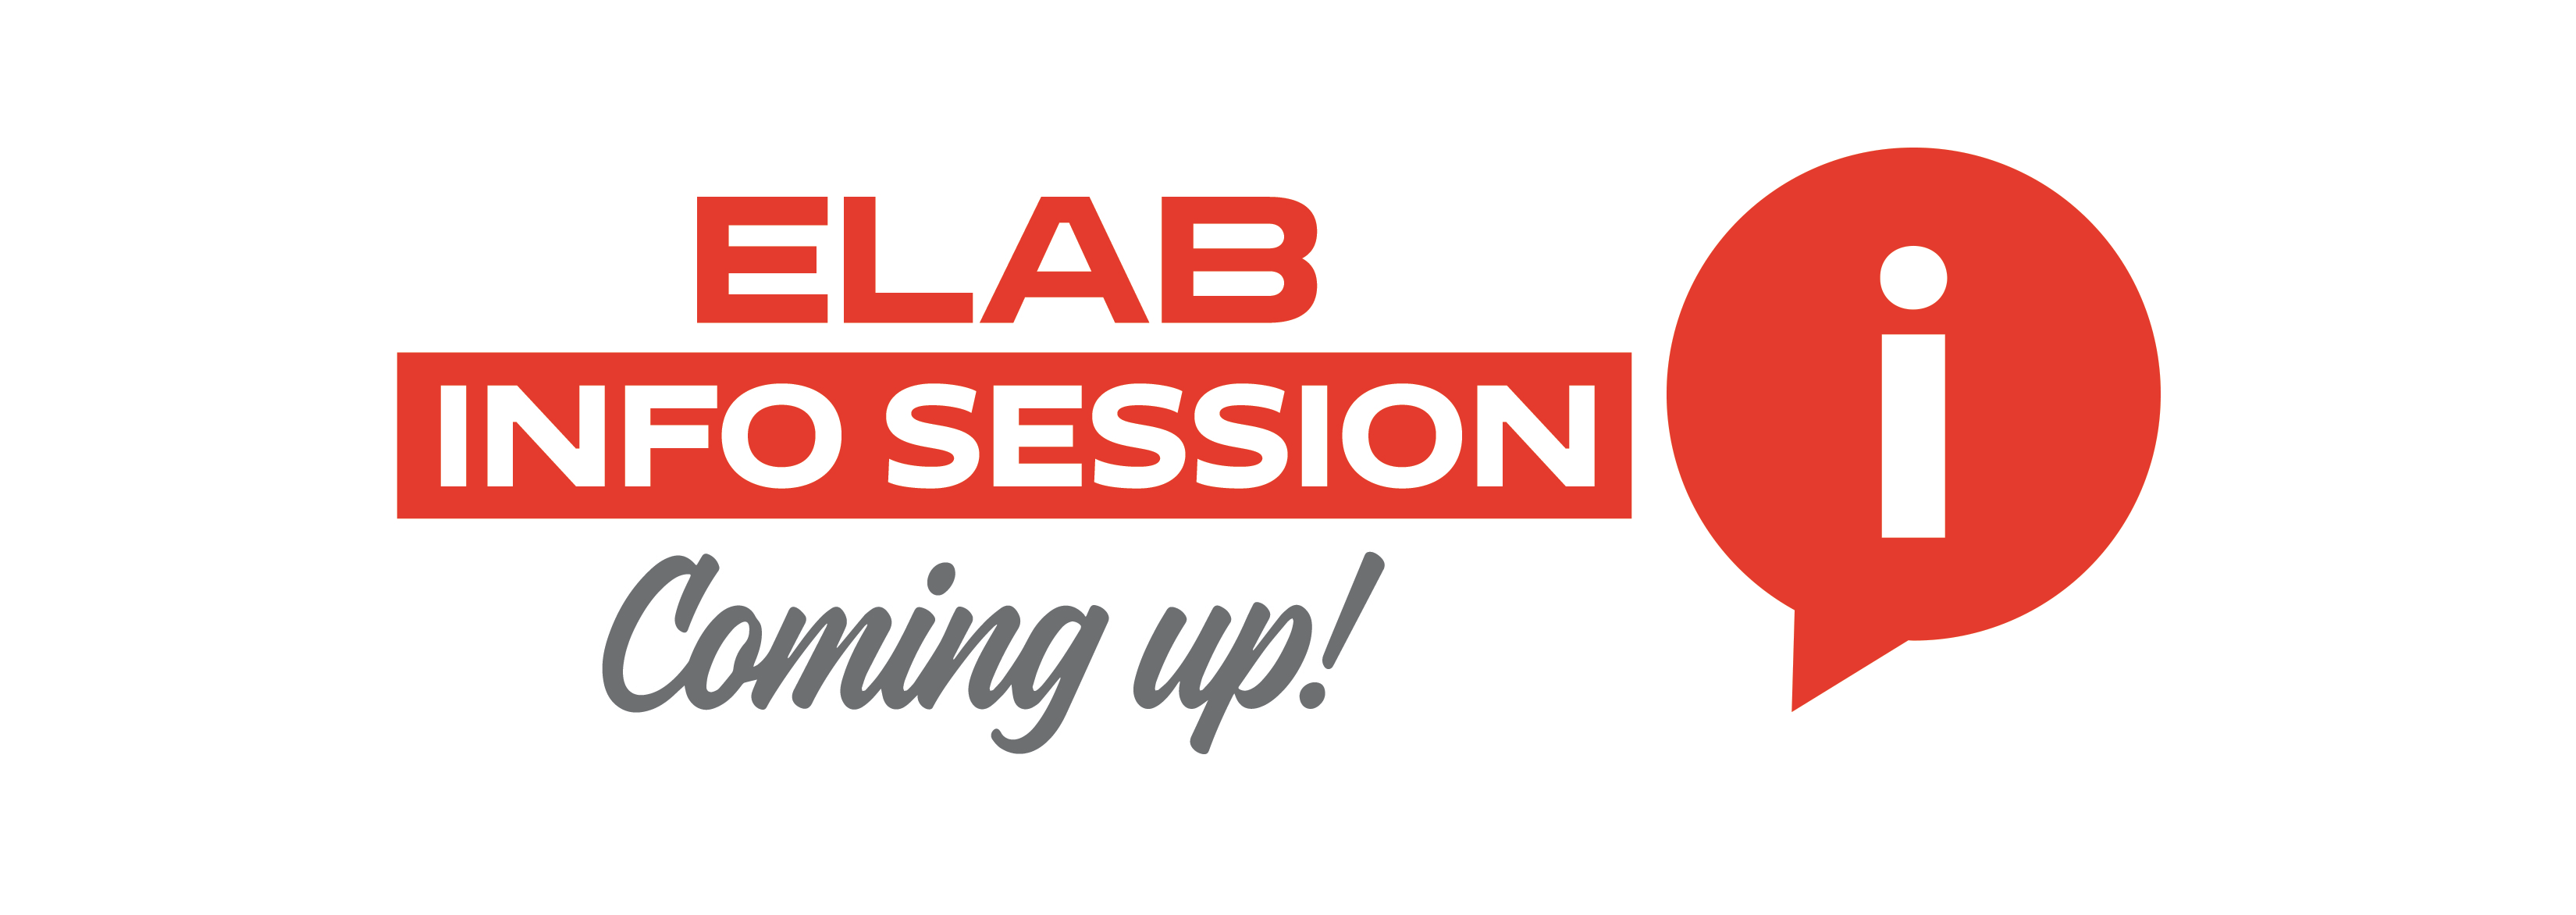 ELab Info Session coming soon!